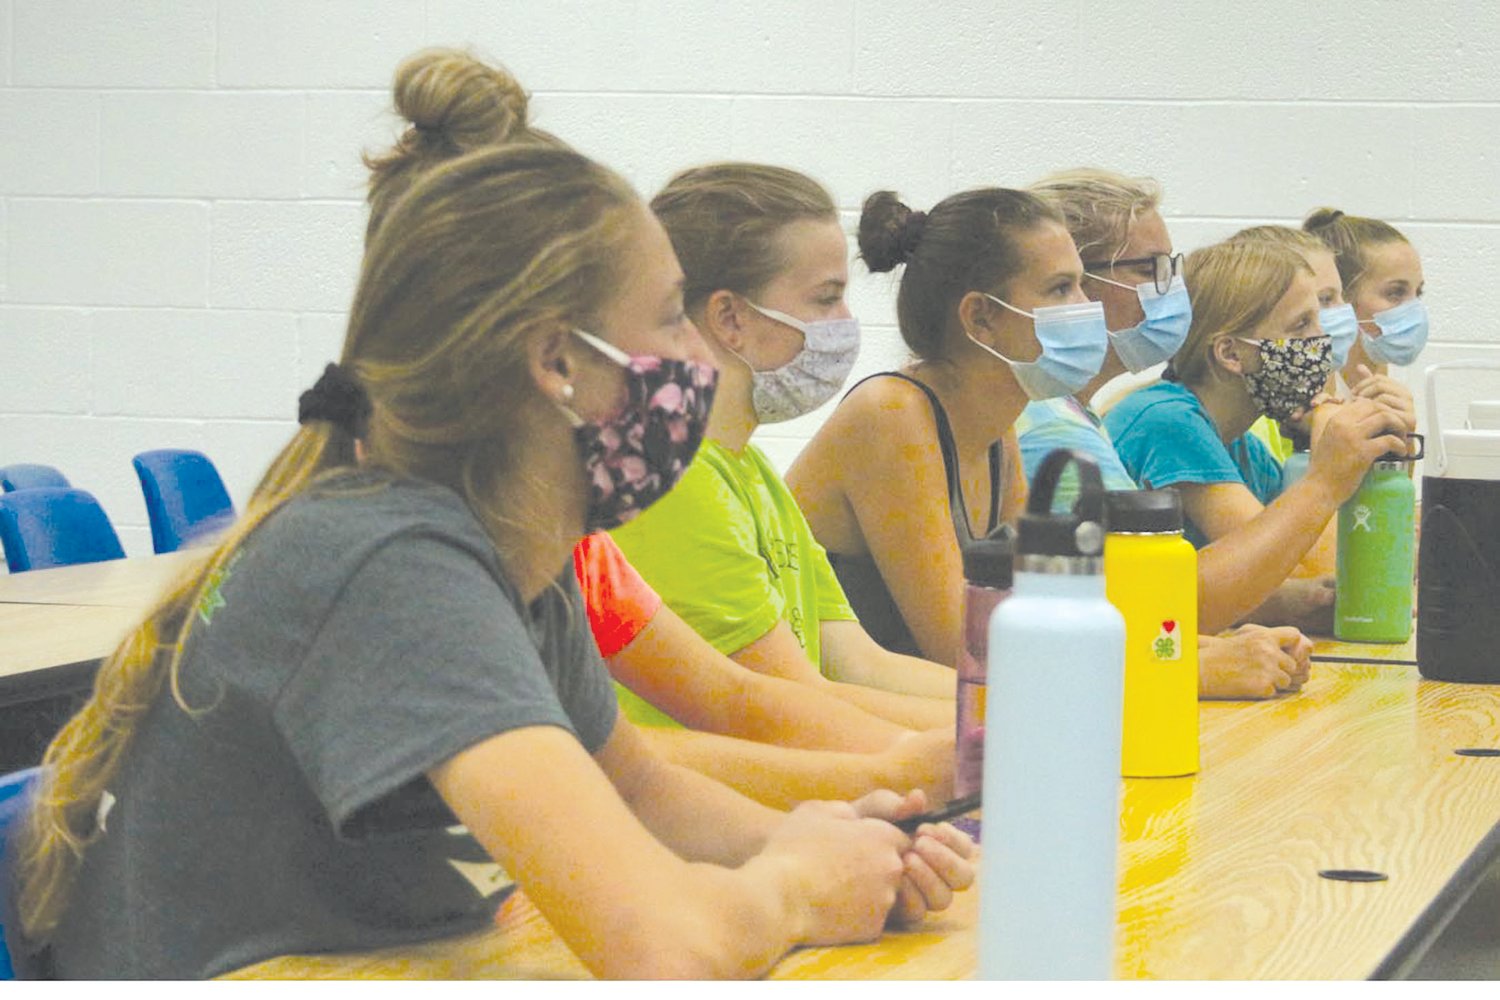 Members of the Lone Tree volleyball team don their masks while listening to co-coach Sonda Prybil’s instructions in a classroom.